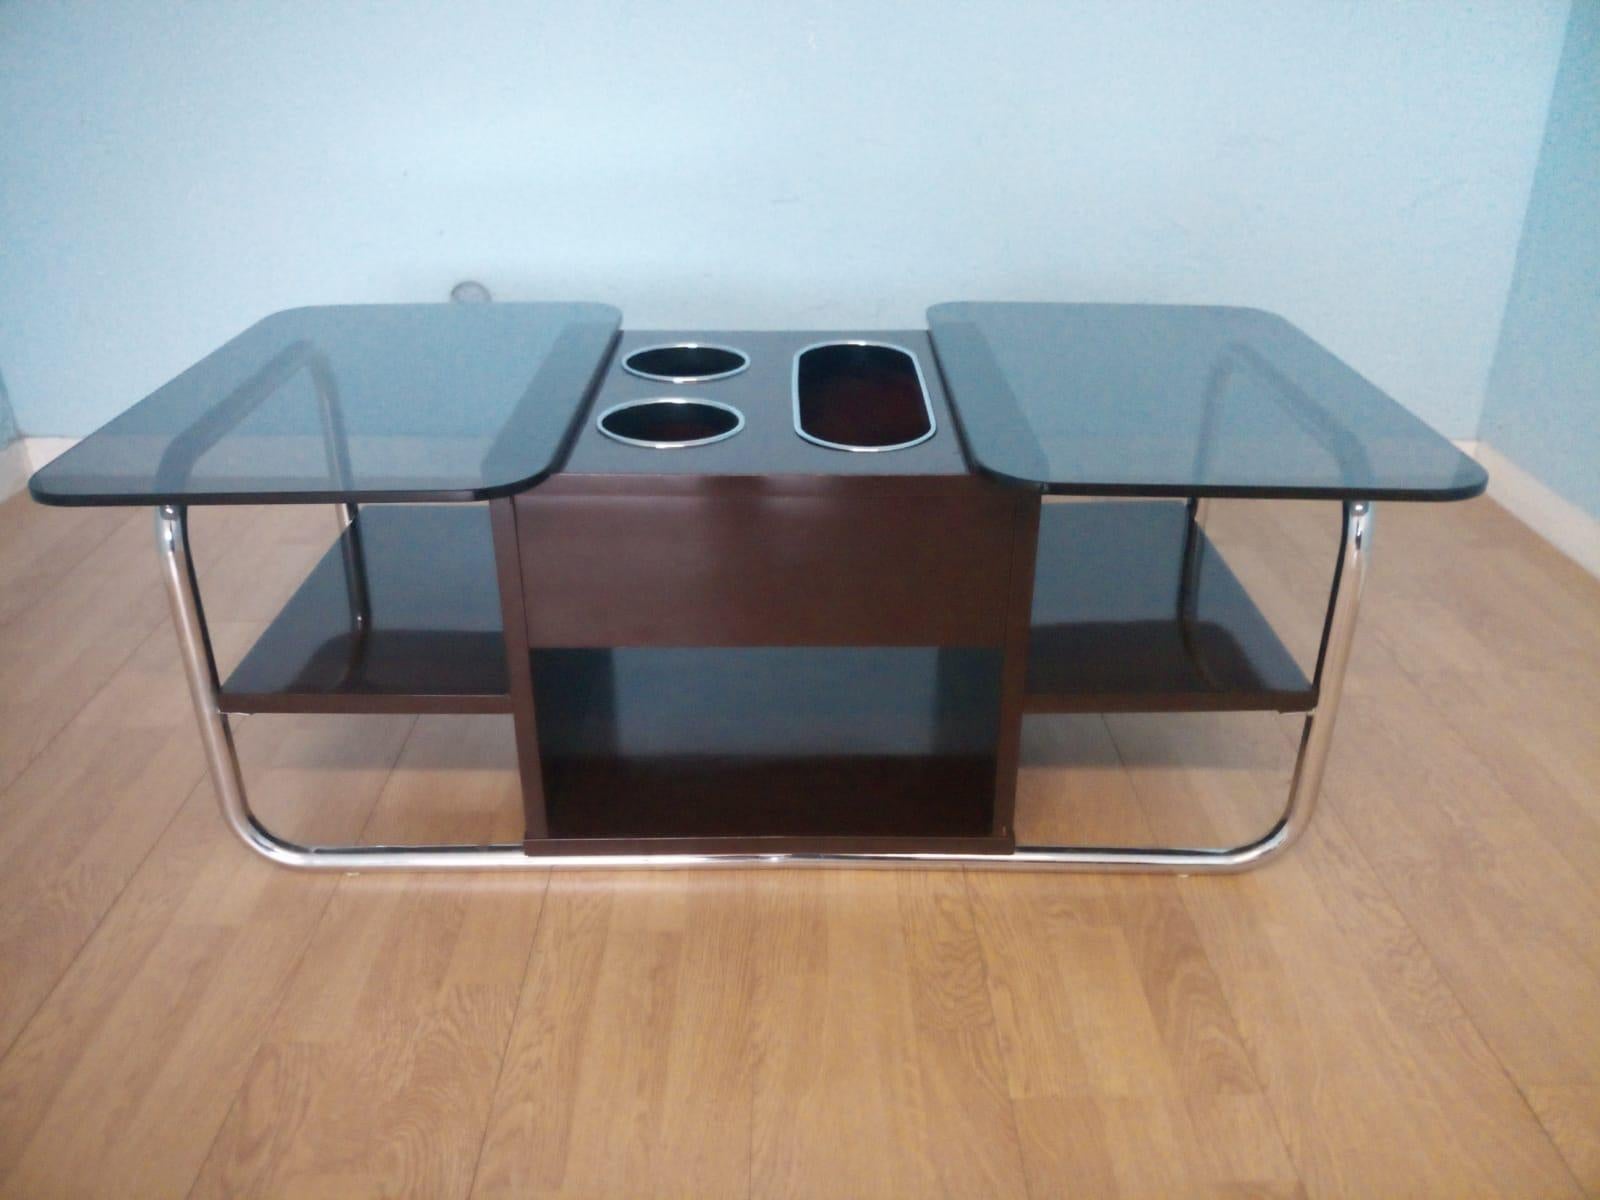 Chrome & Smoked Glass Coffee Table, 1970s Bar Table Design Vintage Industrial For Sale 10